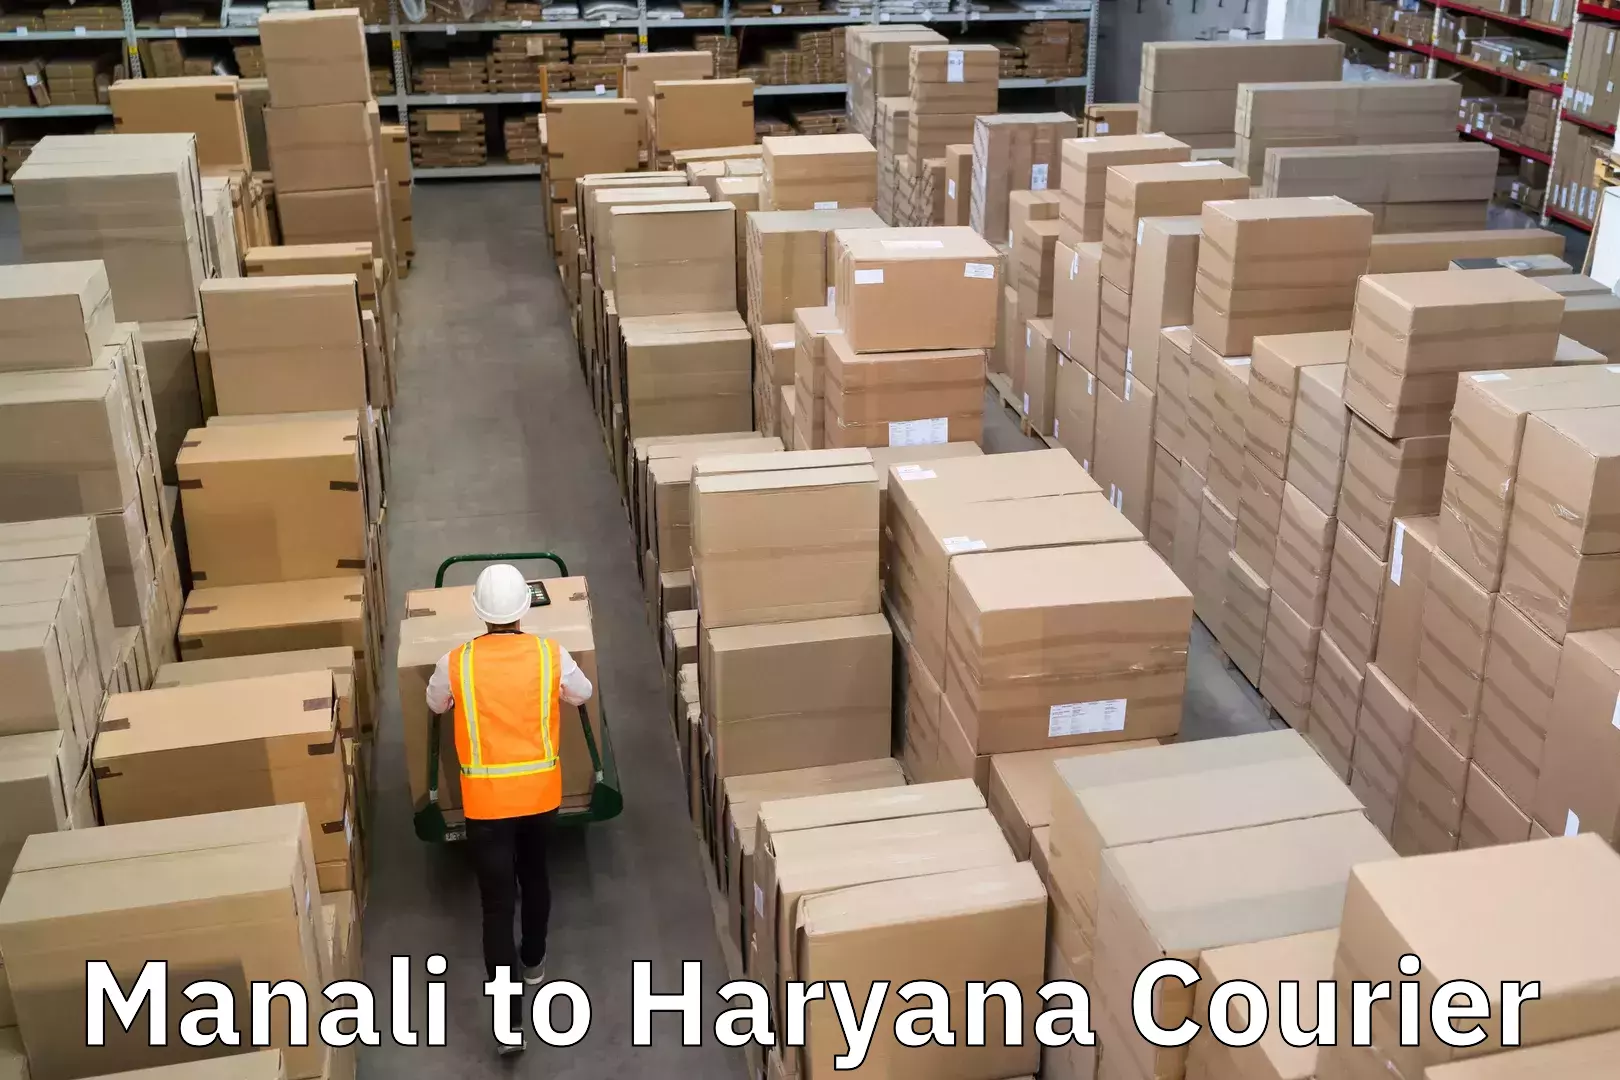 User-friendly courier app Manali to Haryana